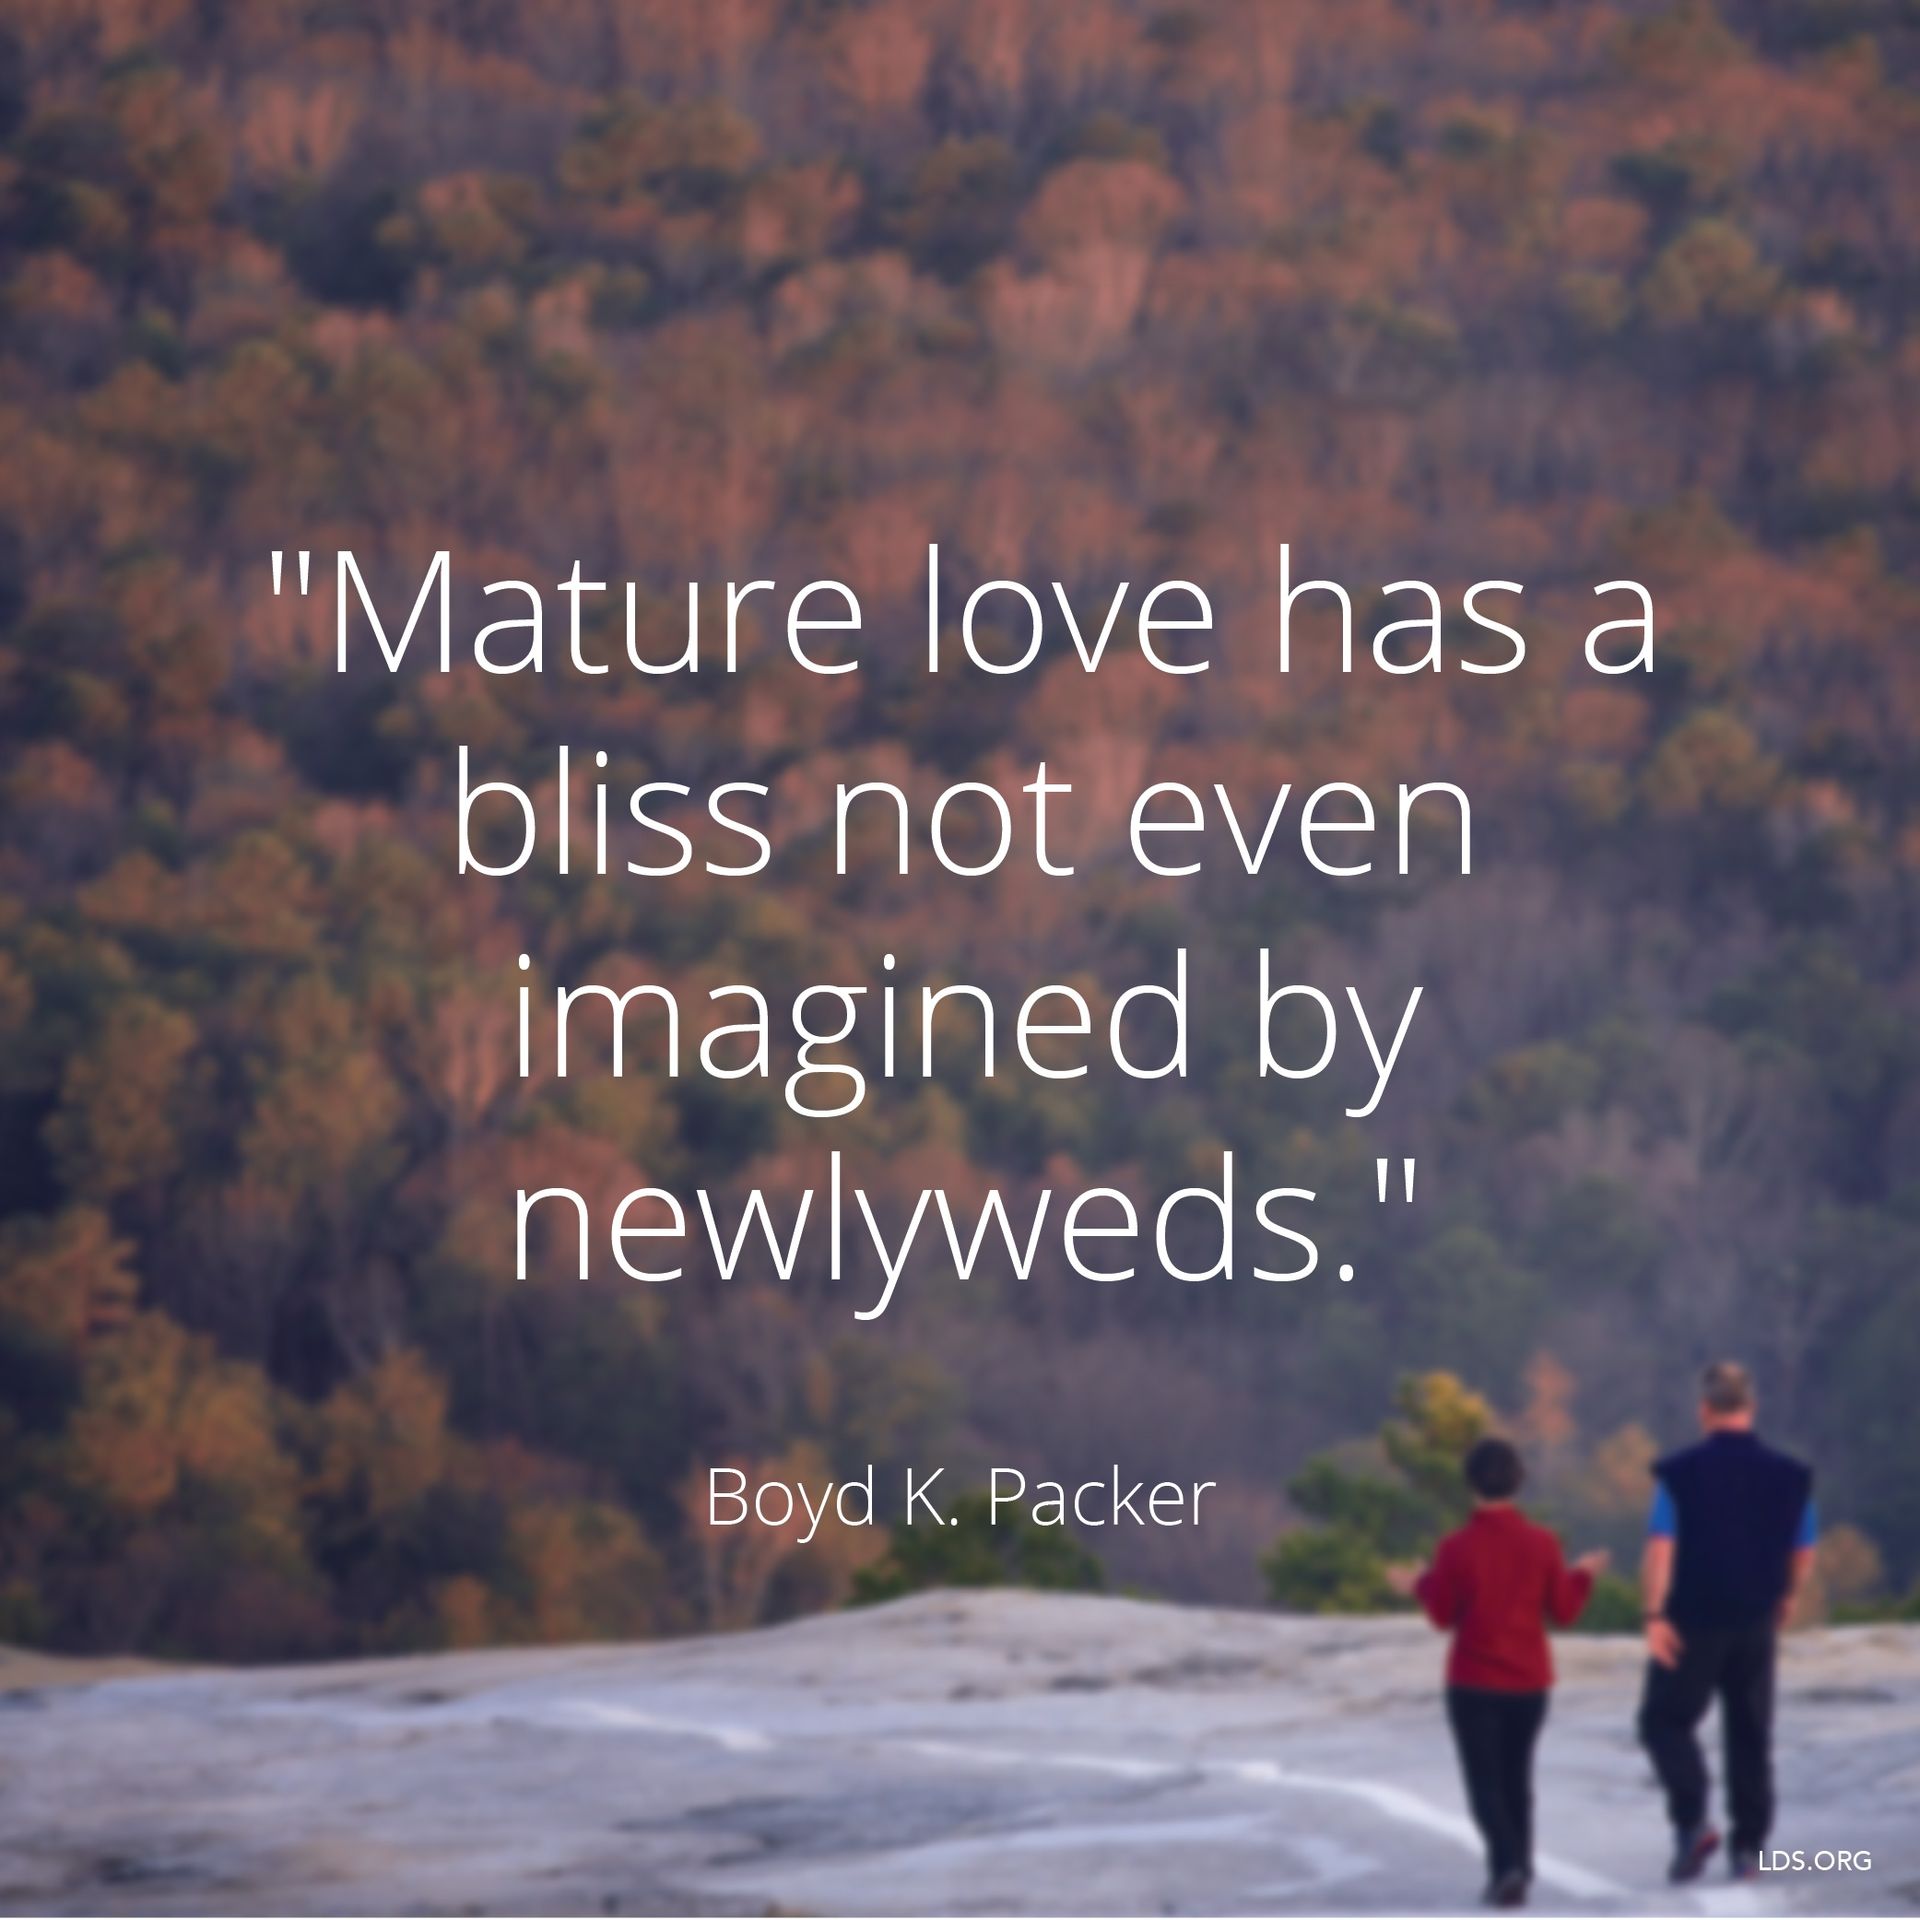 “Mature love has a bliss not even imagined by newlyweds.”—President Boyd K. Packer, “The Plan of Happiness” © undefined ipCode 1.